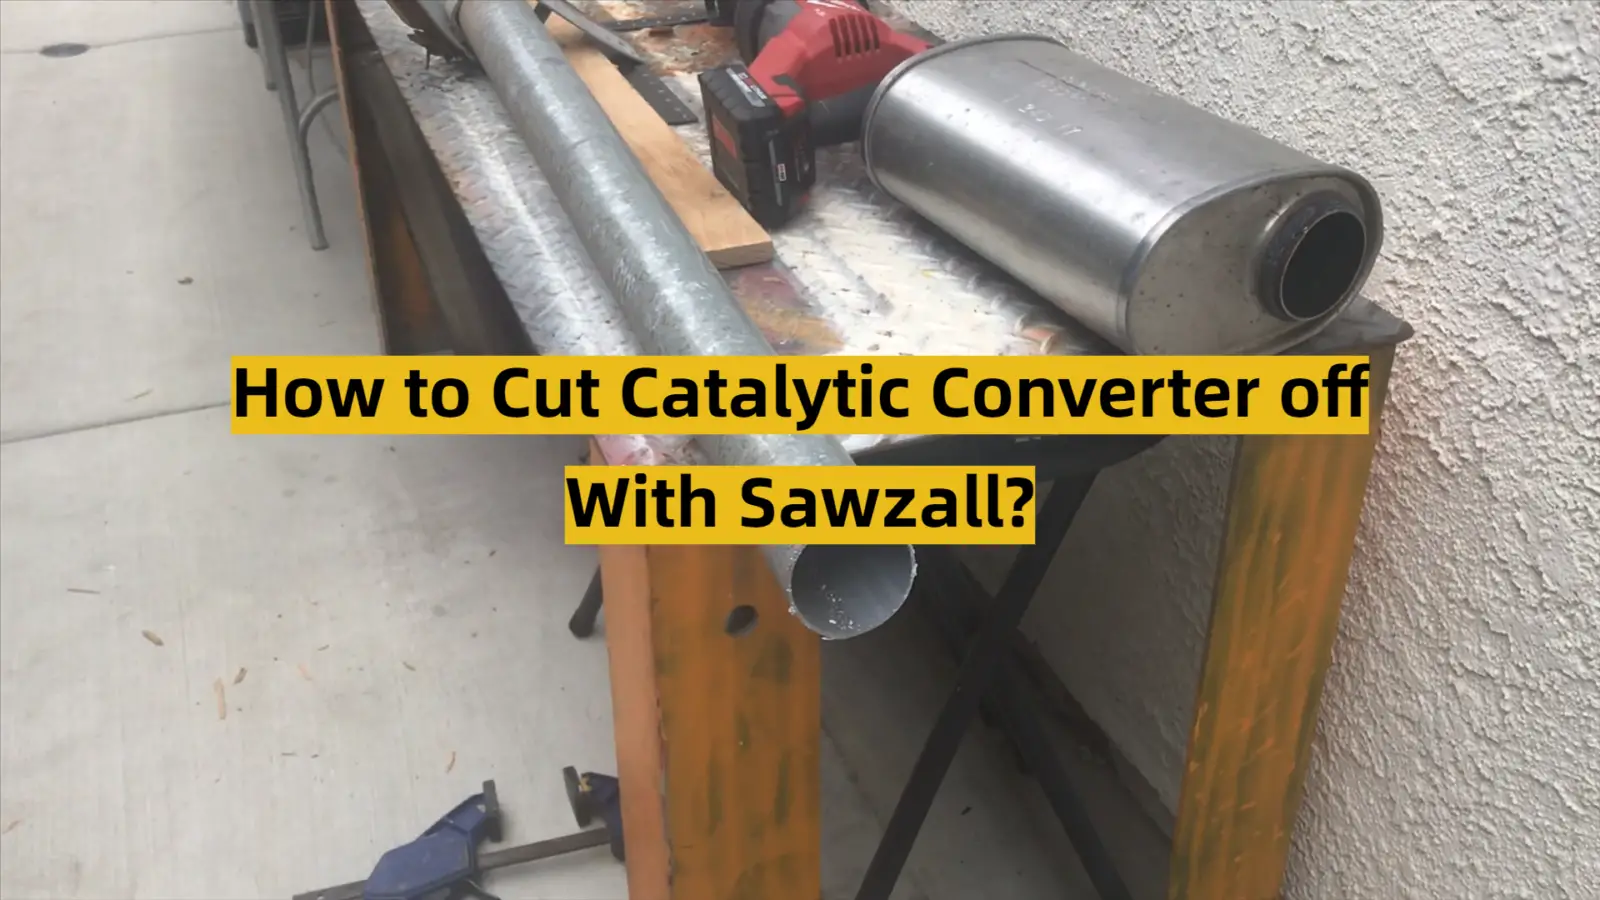 How to Cut Catalytic Converter off With Sawzall?